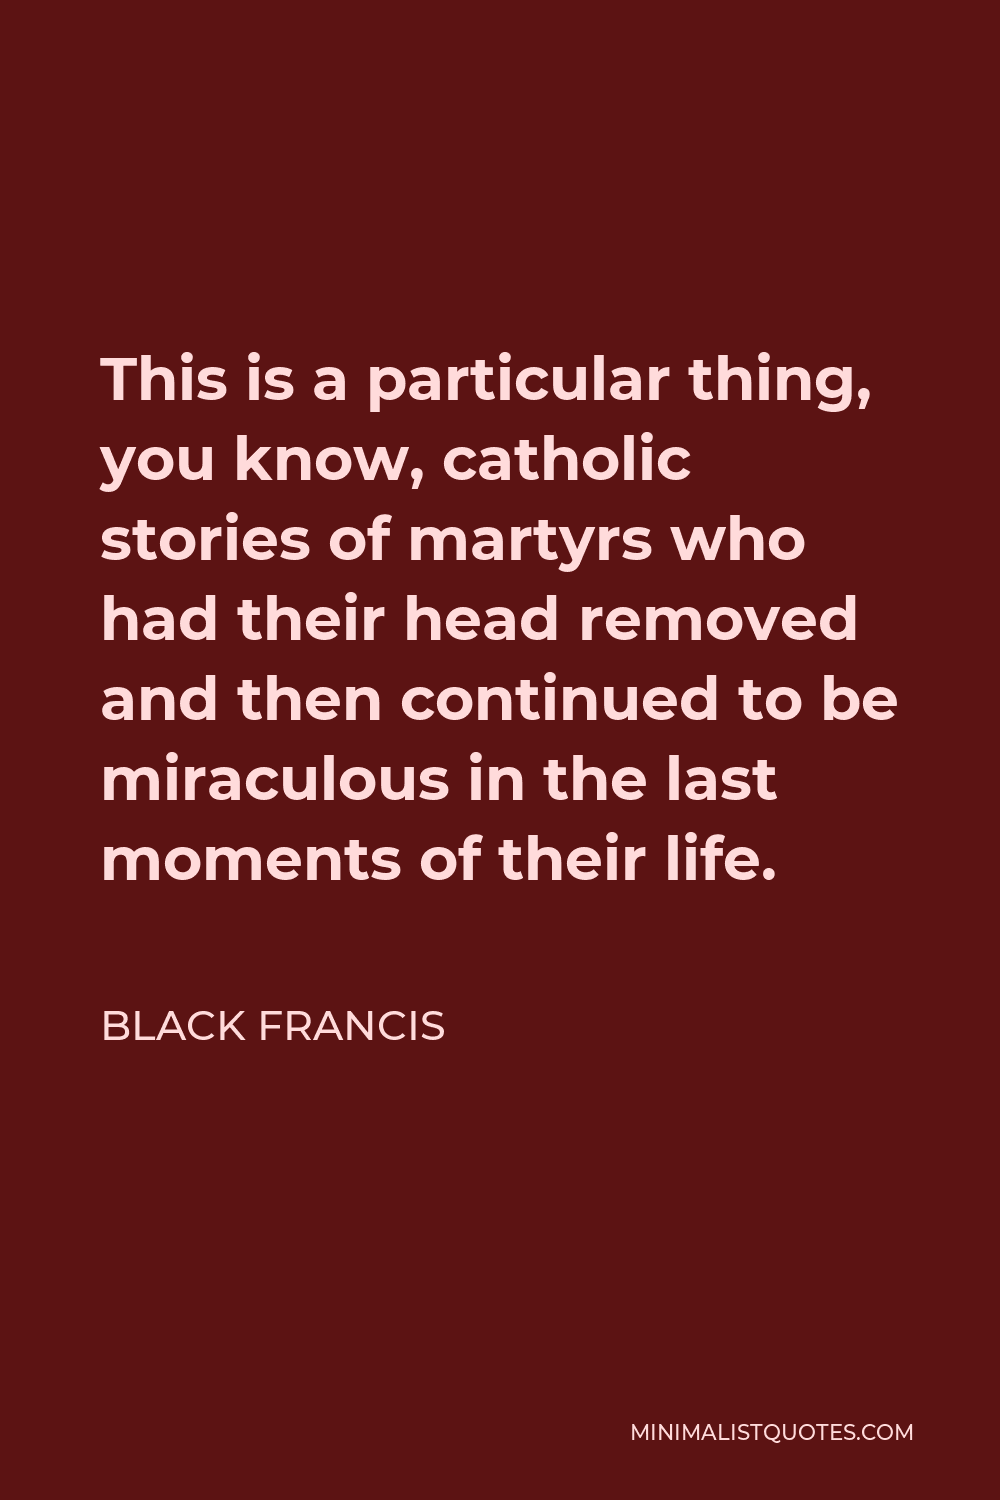 Black Francis Quote - This is a particular thing, you know, catholic stories of martyrs who had their head removed and then continued to be miraculous in the last moments of their life.